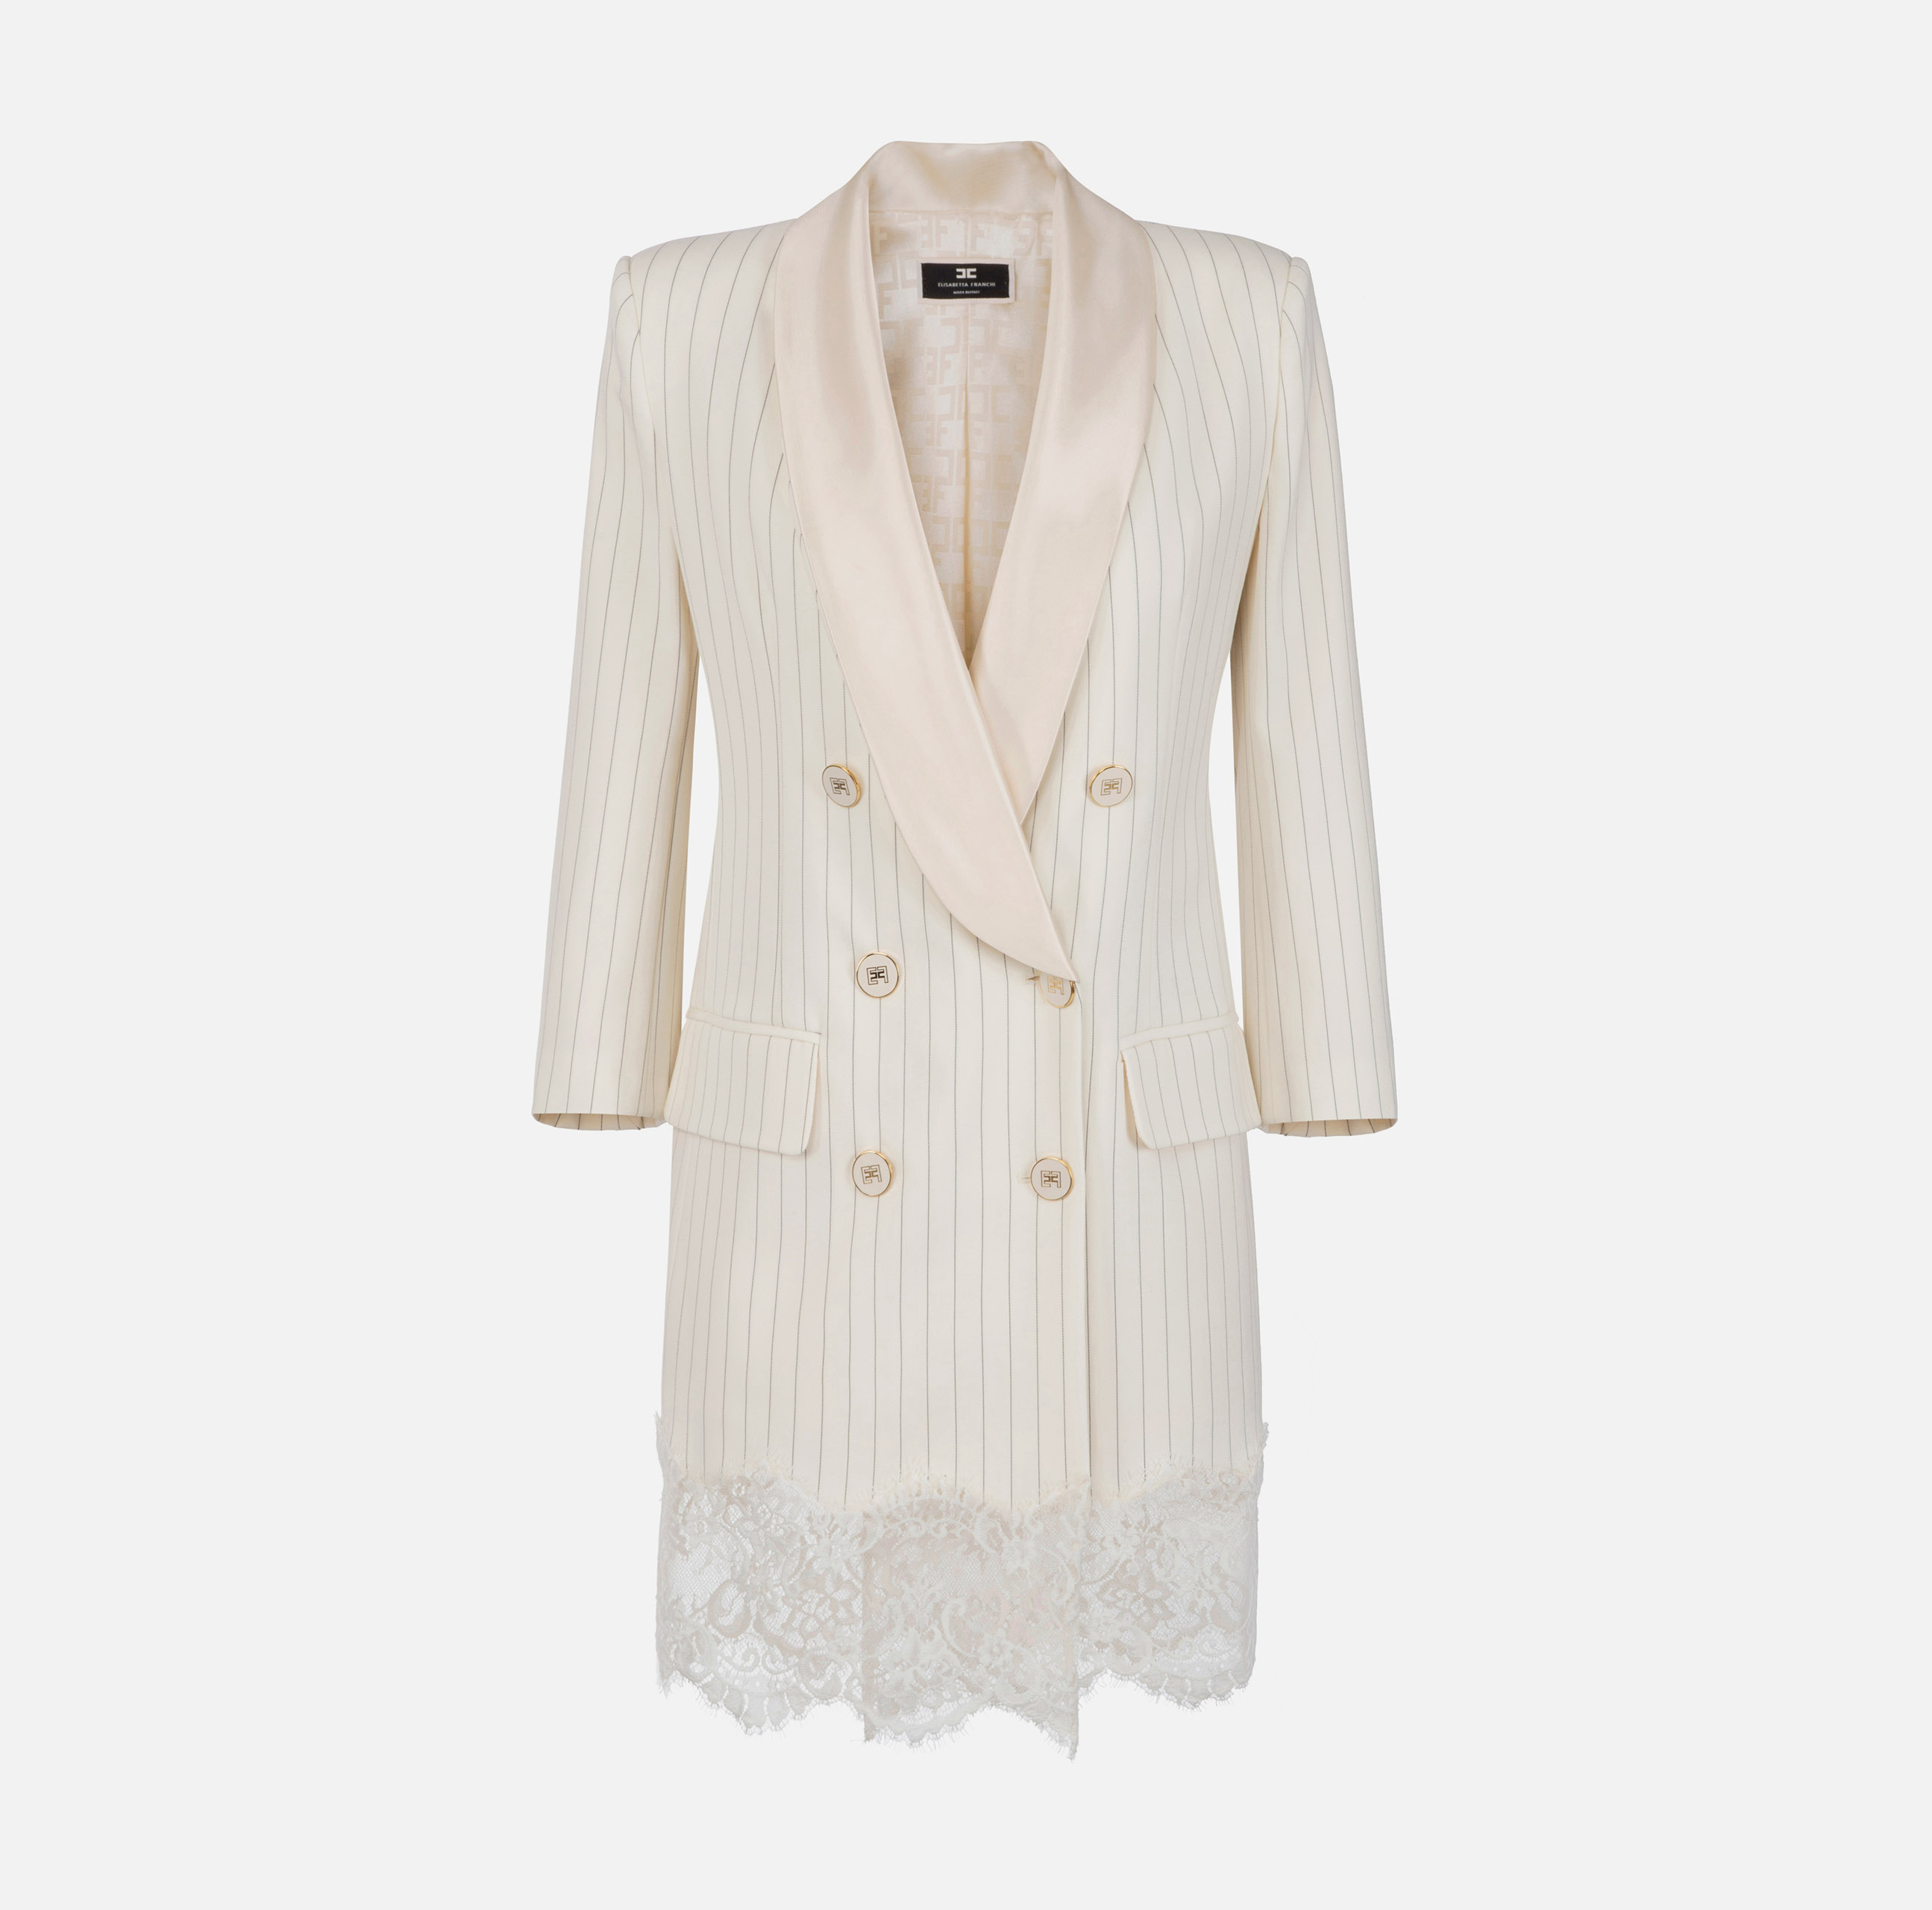 Coat dress in cool wool with lace - ABBIGLIAMENTO - Elisabetta Franchi